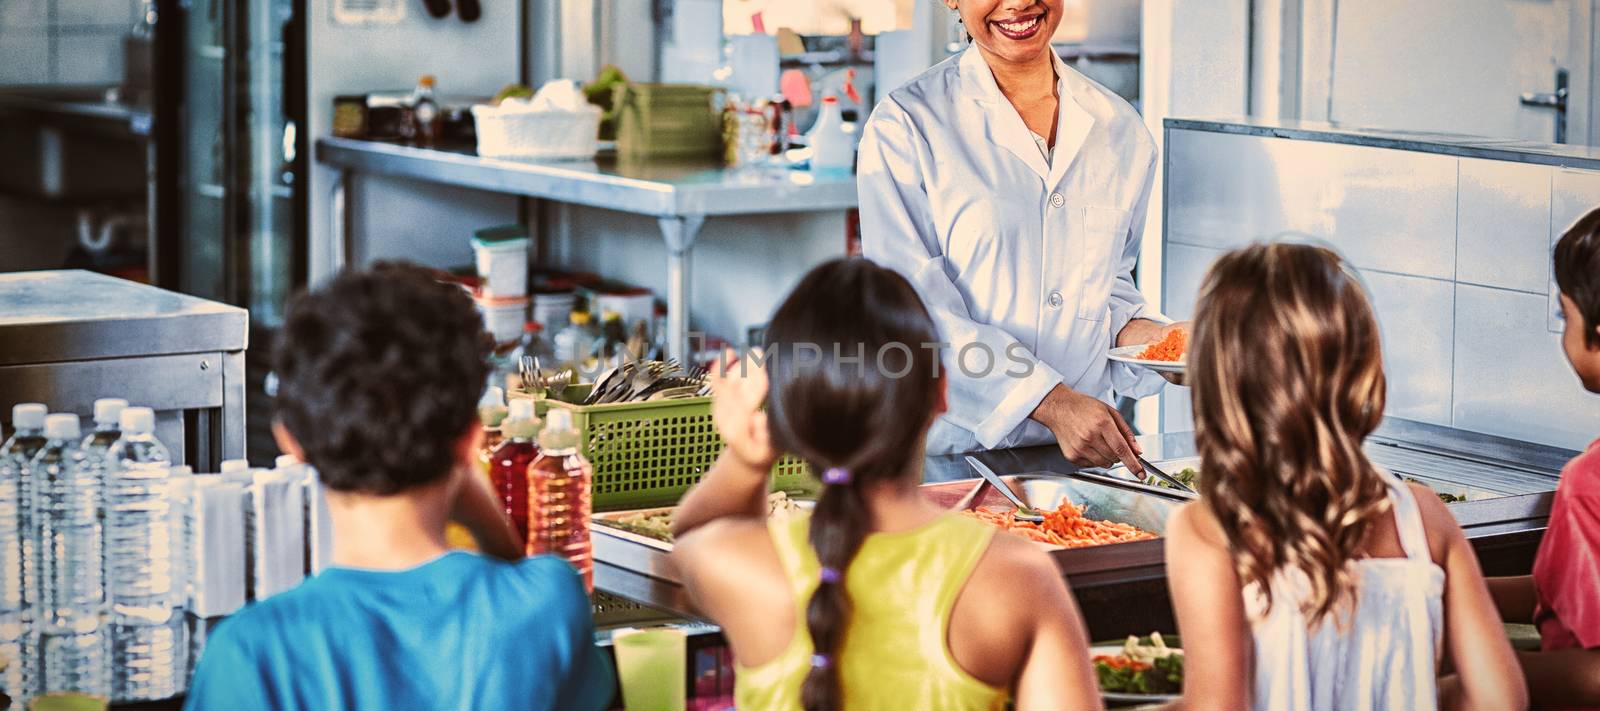 Smiling woman serving food to schoolchildren in canteen